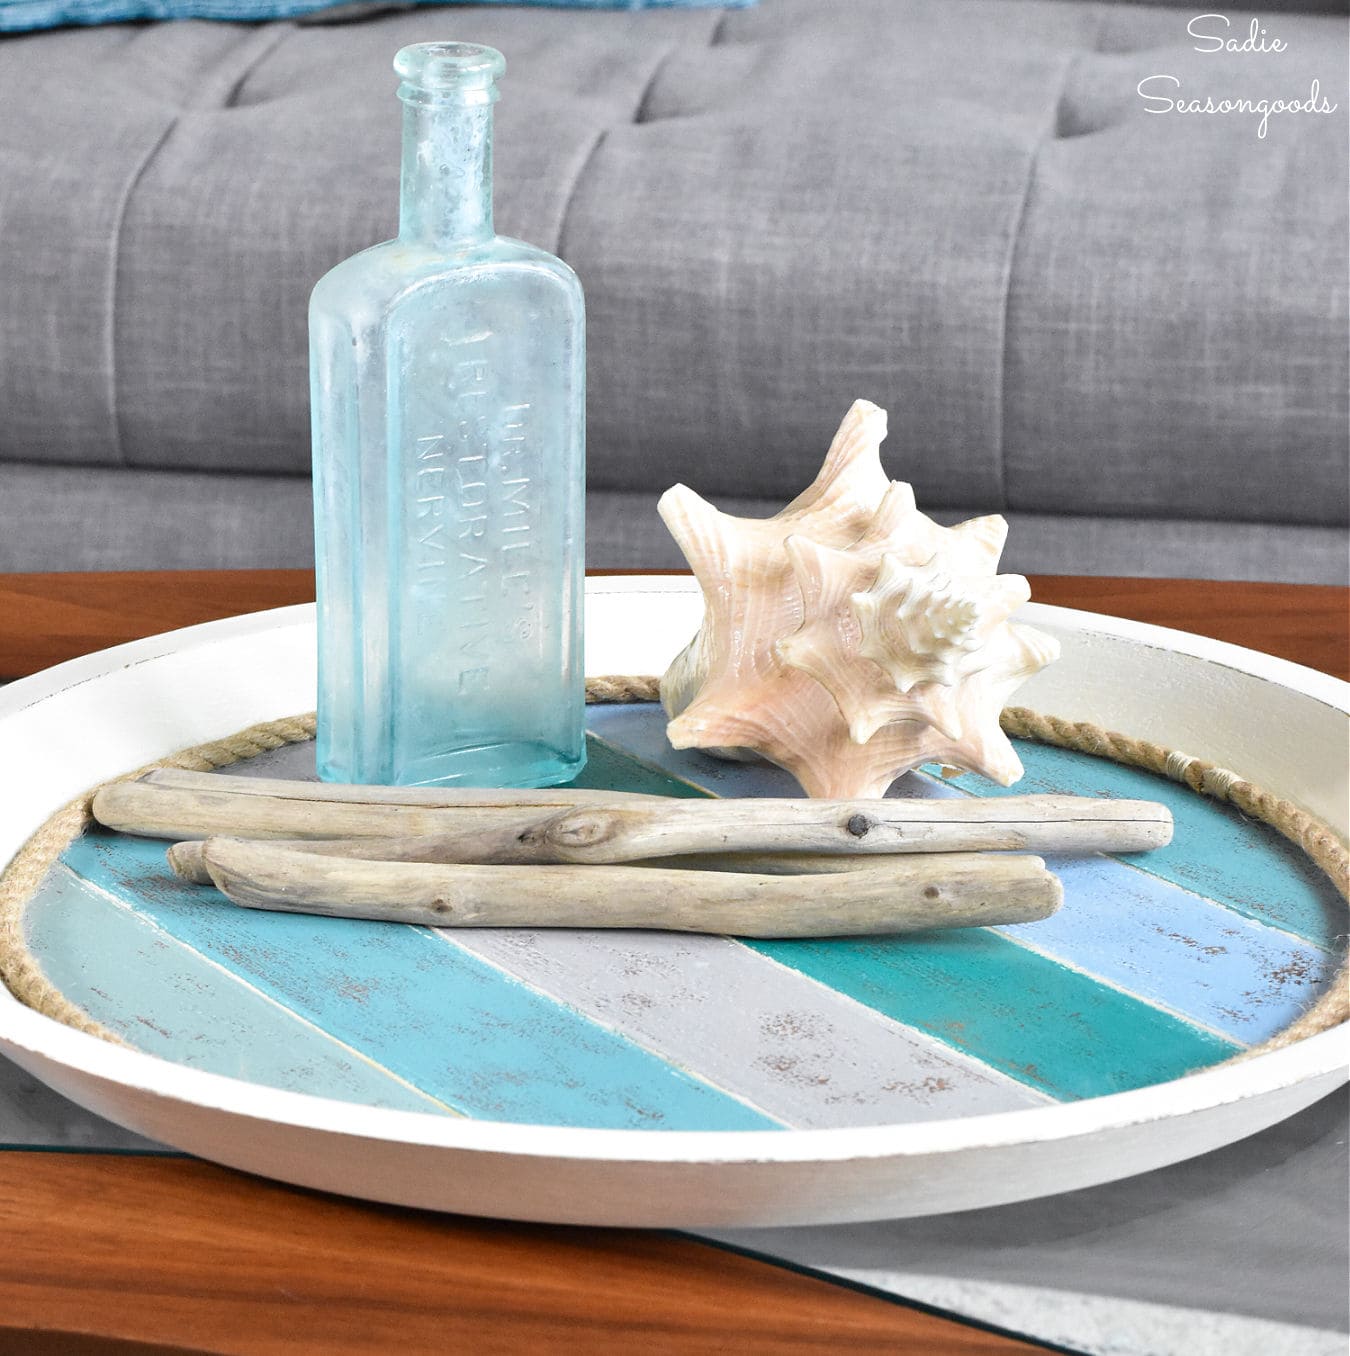 Upcycling Ideas and Projects for Decorative Trays